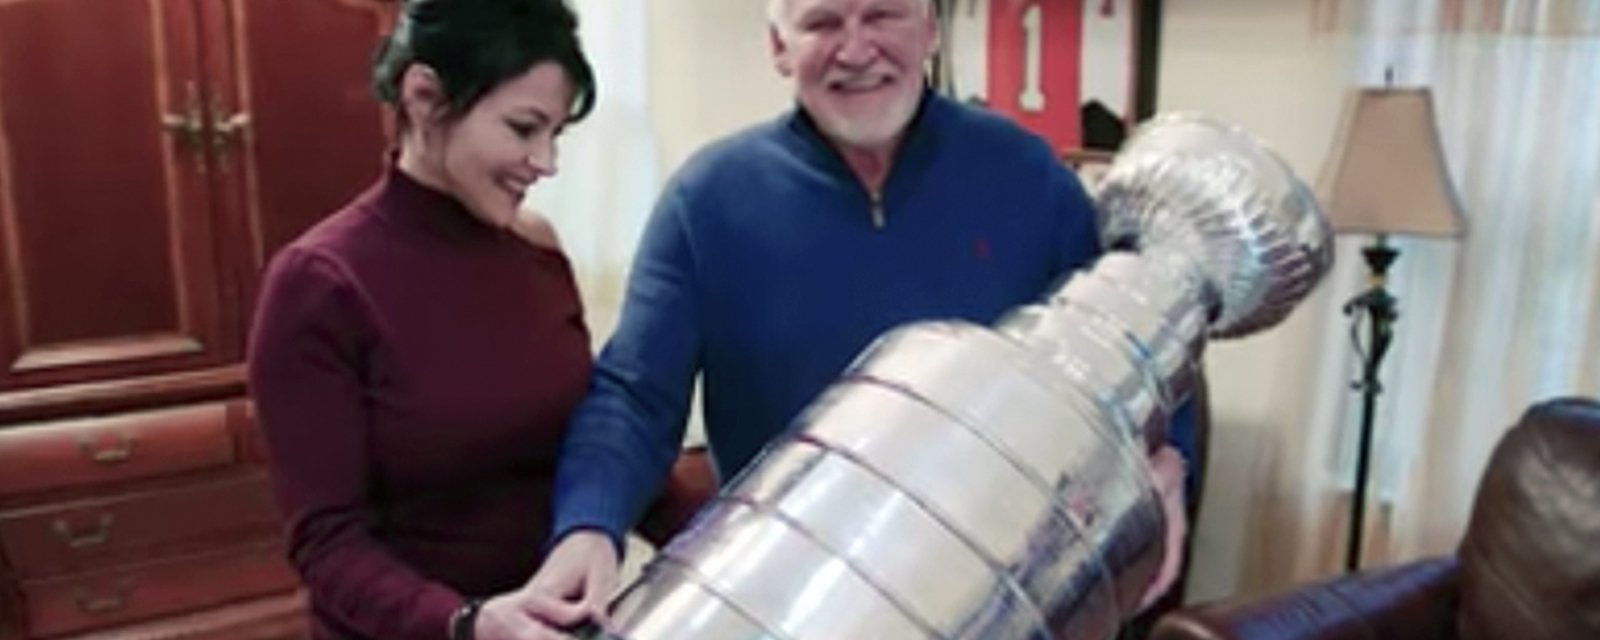 After nearly 45 years, Flyers legend Bernie Parent finally gets his day with the Stanley Cup